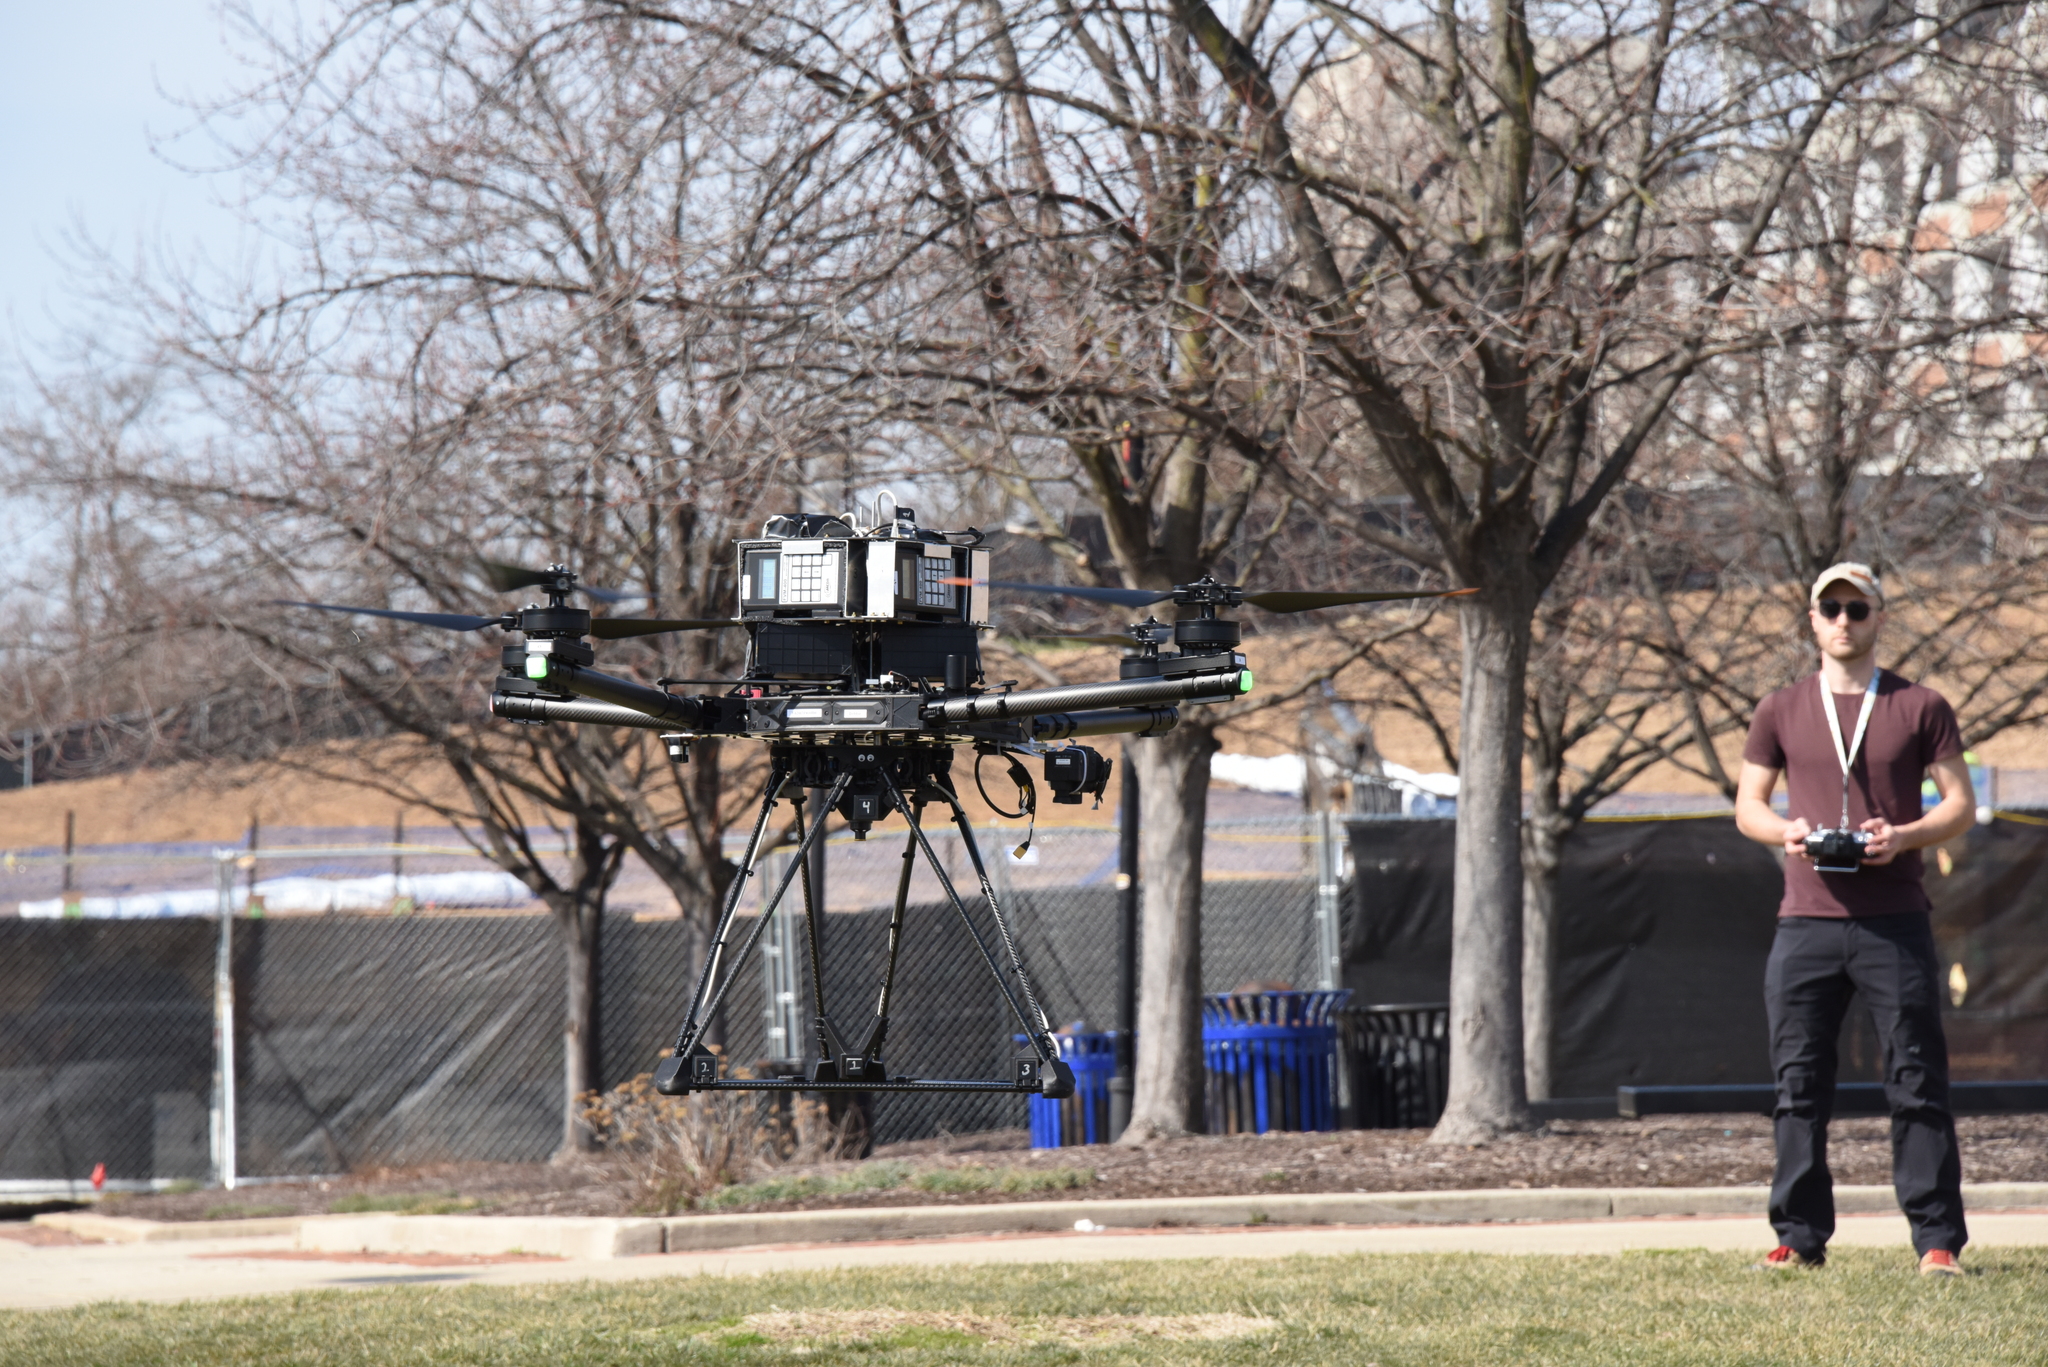 Licensed drone pilot and physics senior Meyer Taffel is test-flying a drone over campus to magnetically map UMD's underground utilities. Credit: Dan Lathrop